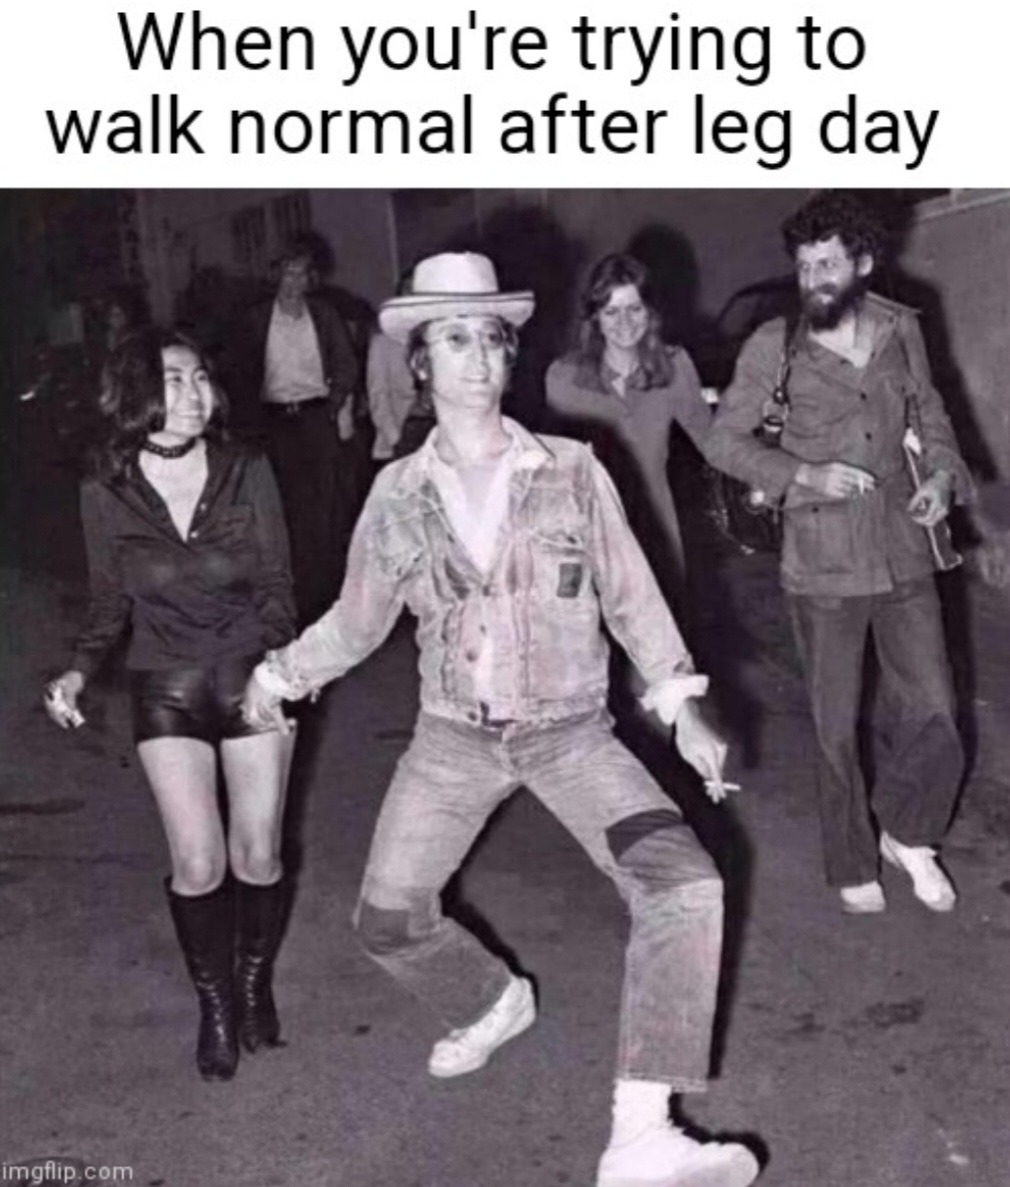 When you're trying to walk normal after leg day - meme